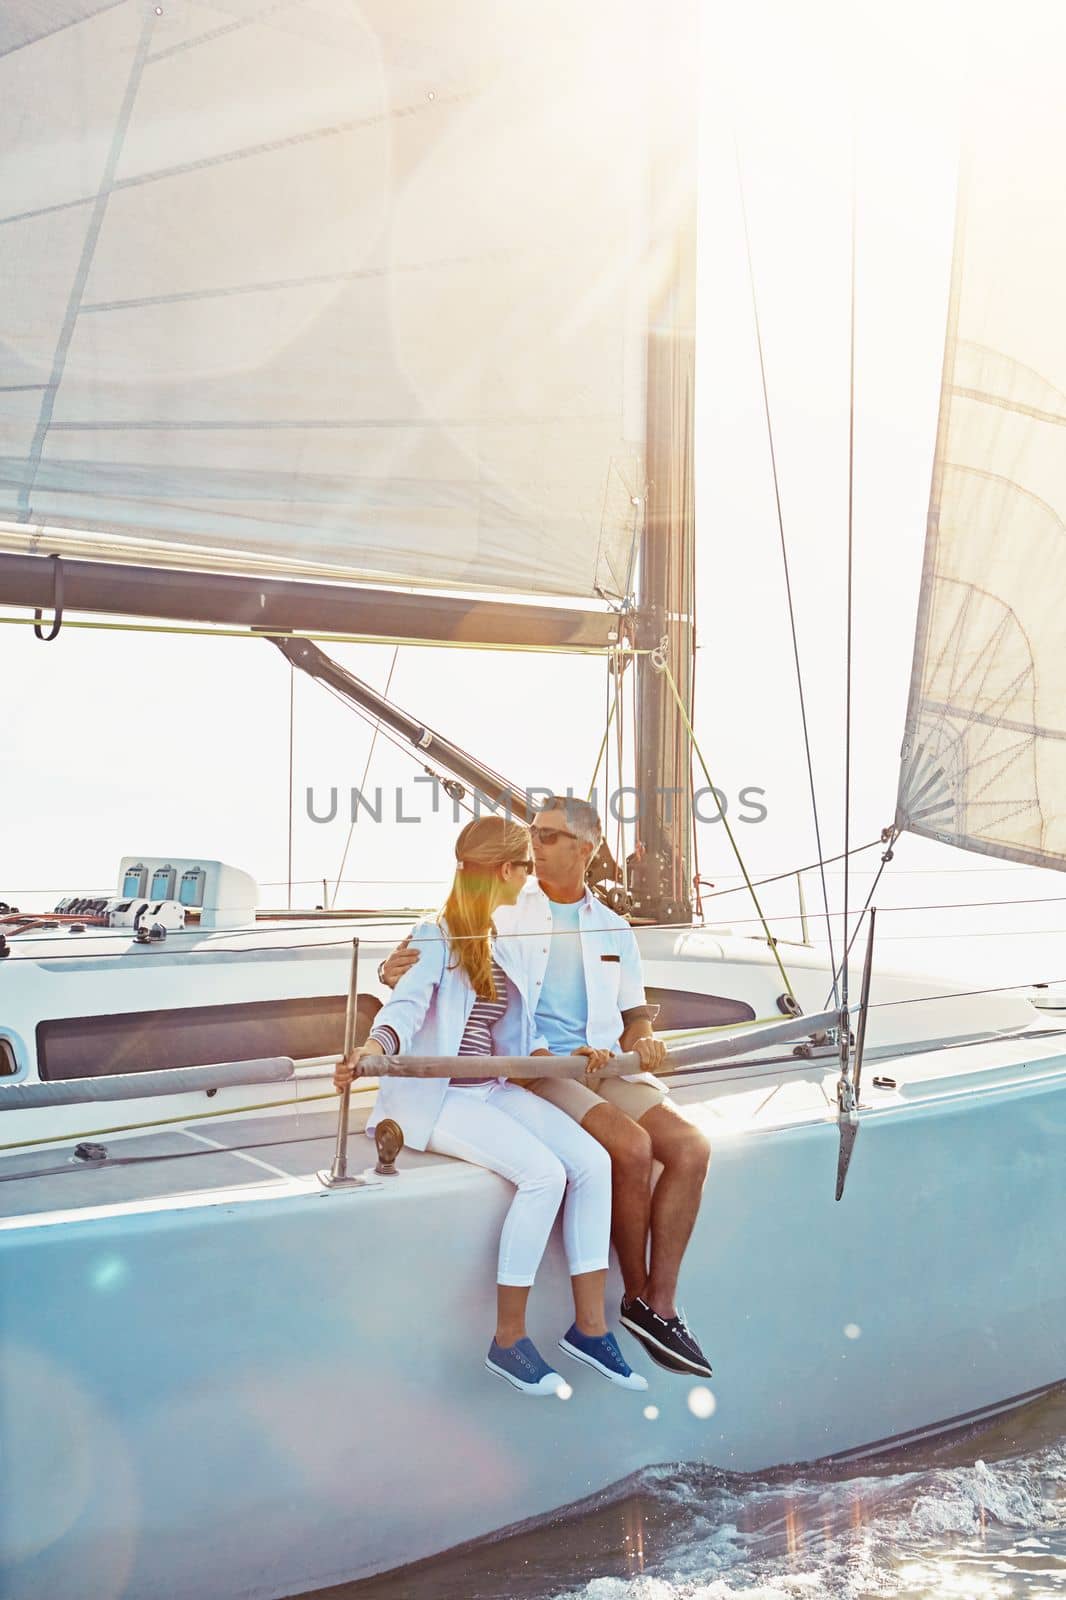 Relax, travel and luxury with couple on yacht for summer, love and sunset on Rome vacation trip. Adventure, journey and vip with man and woman sailing on boat for ocean, tropical and honeymoon at sea.